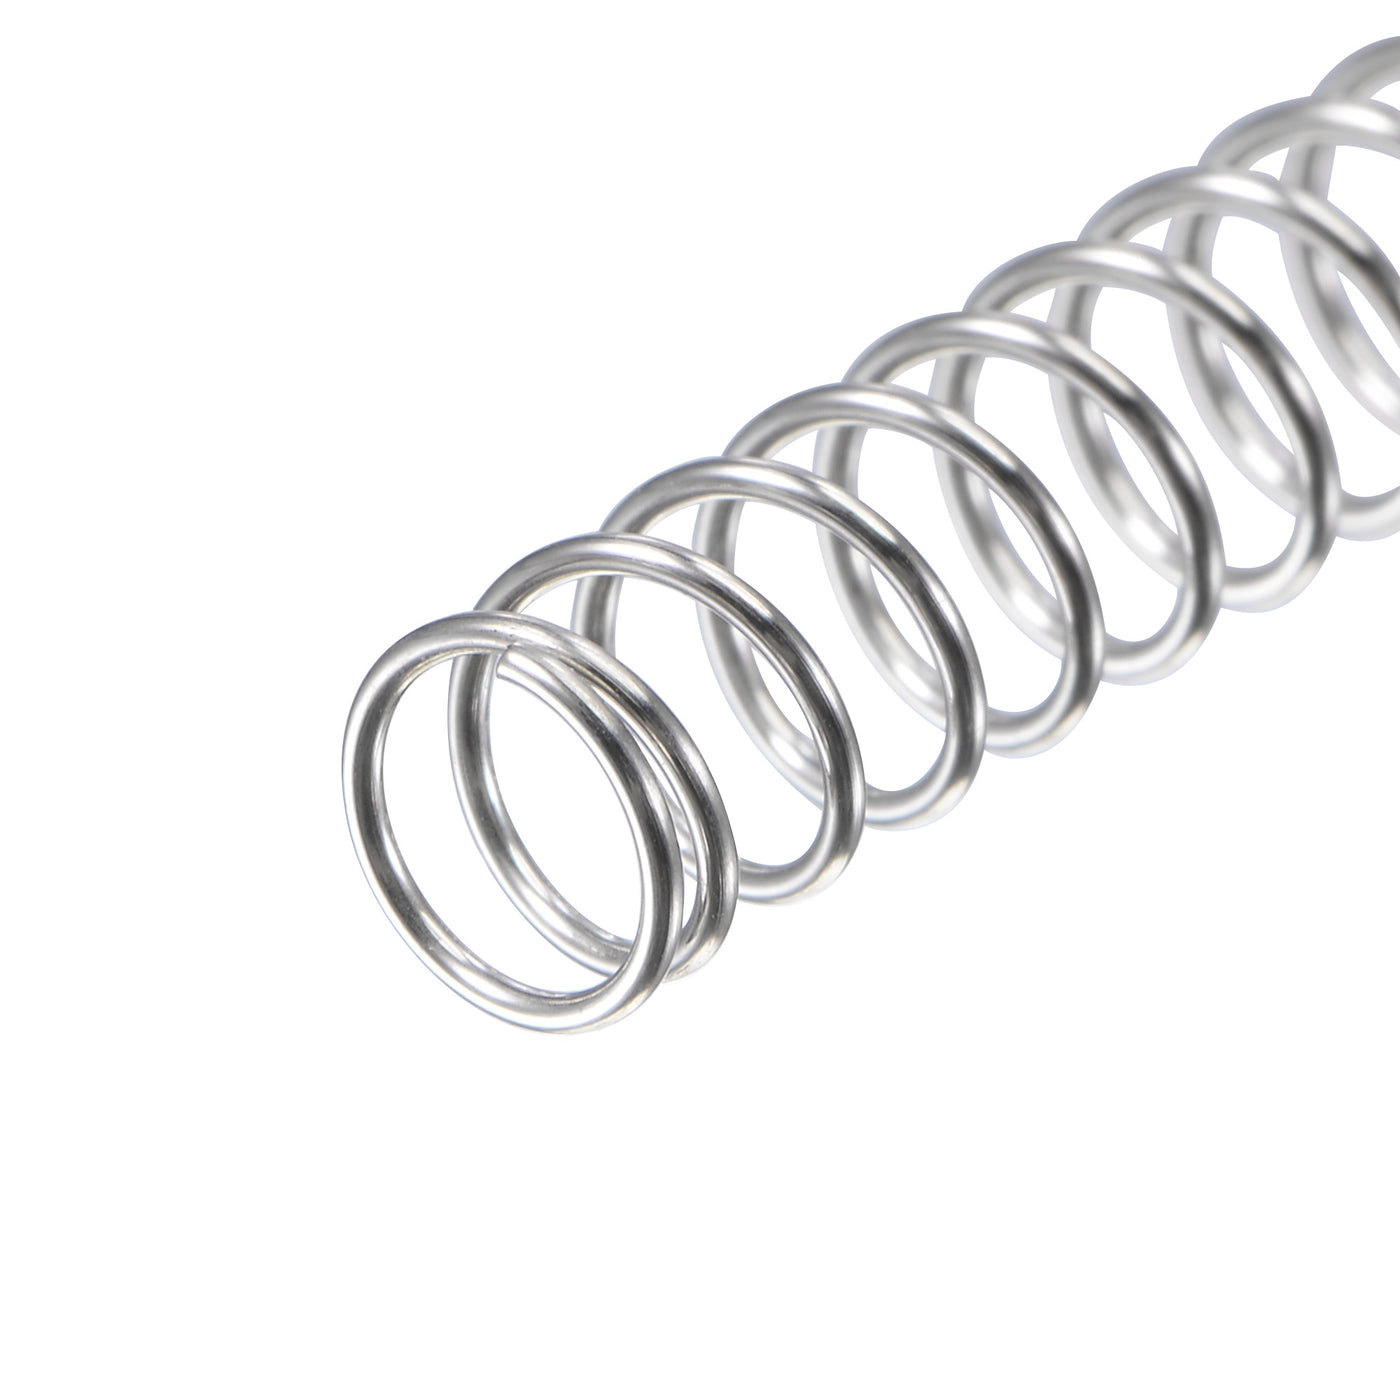 uxcell Uxcell 5mmx0.5mmx25mm 304 Stainless Steel Compression Spring 5.9N Load Capacity 20pcs